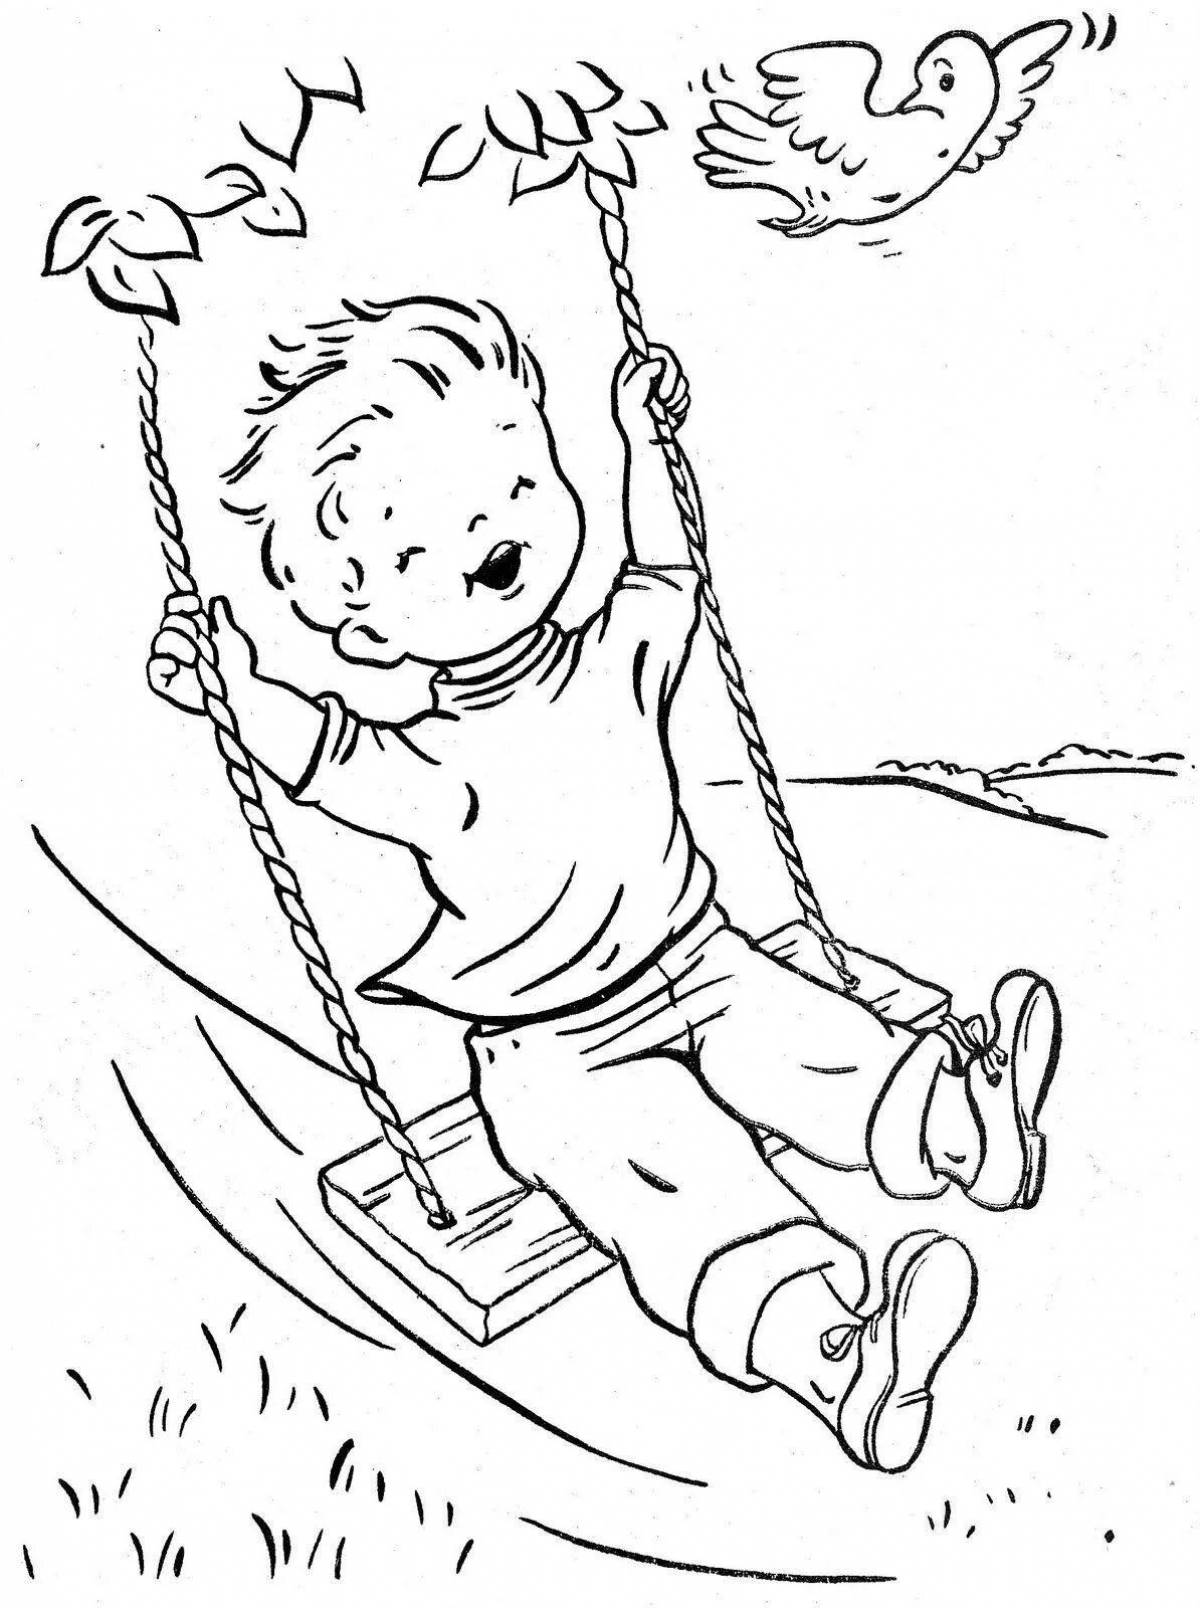 Adorable Swing Coloring Page for Toddlers